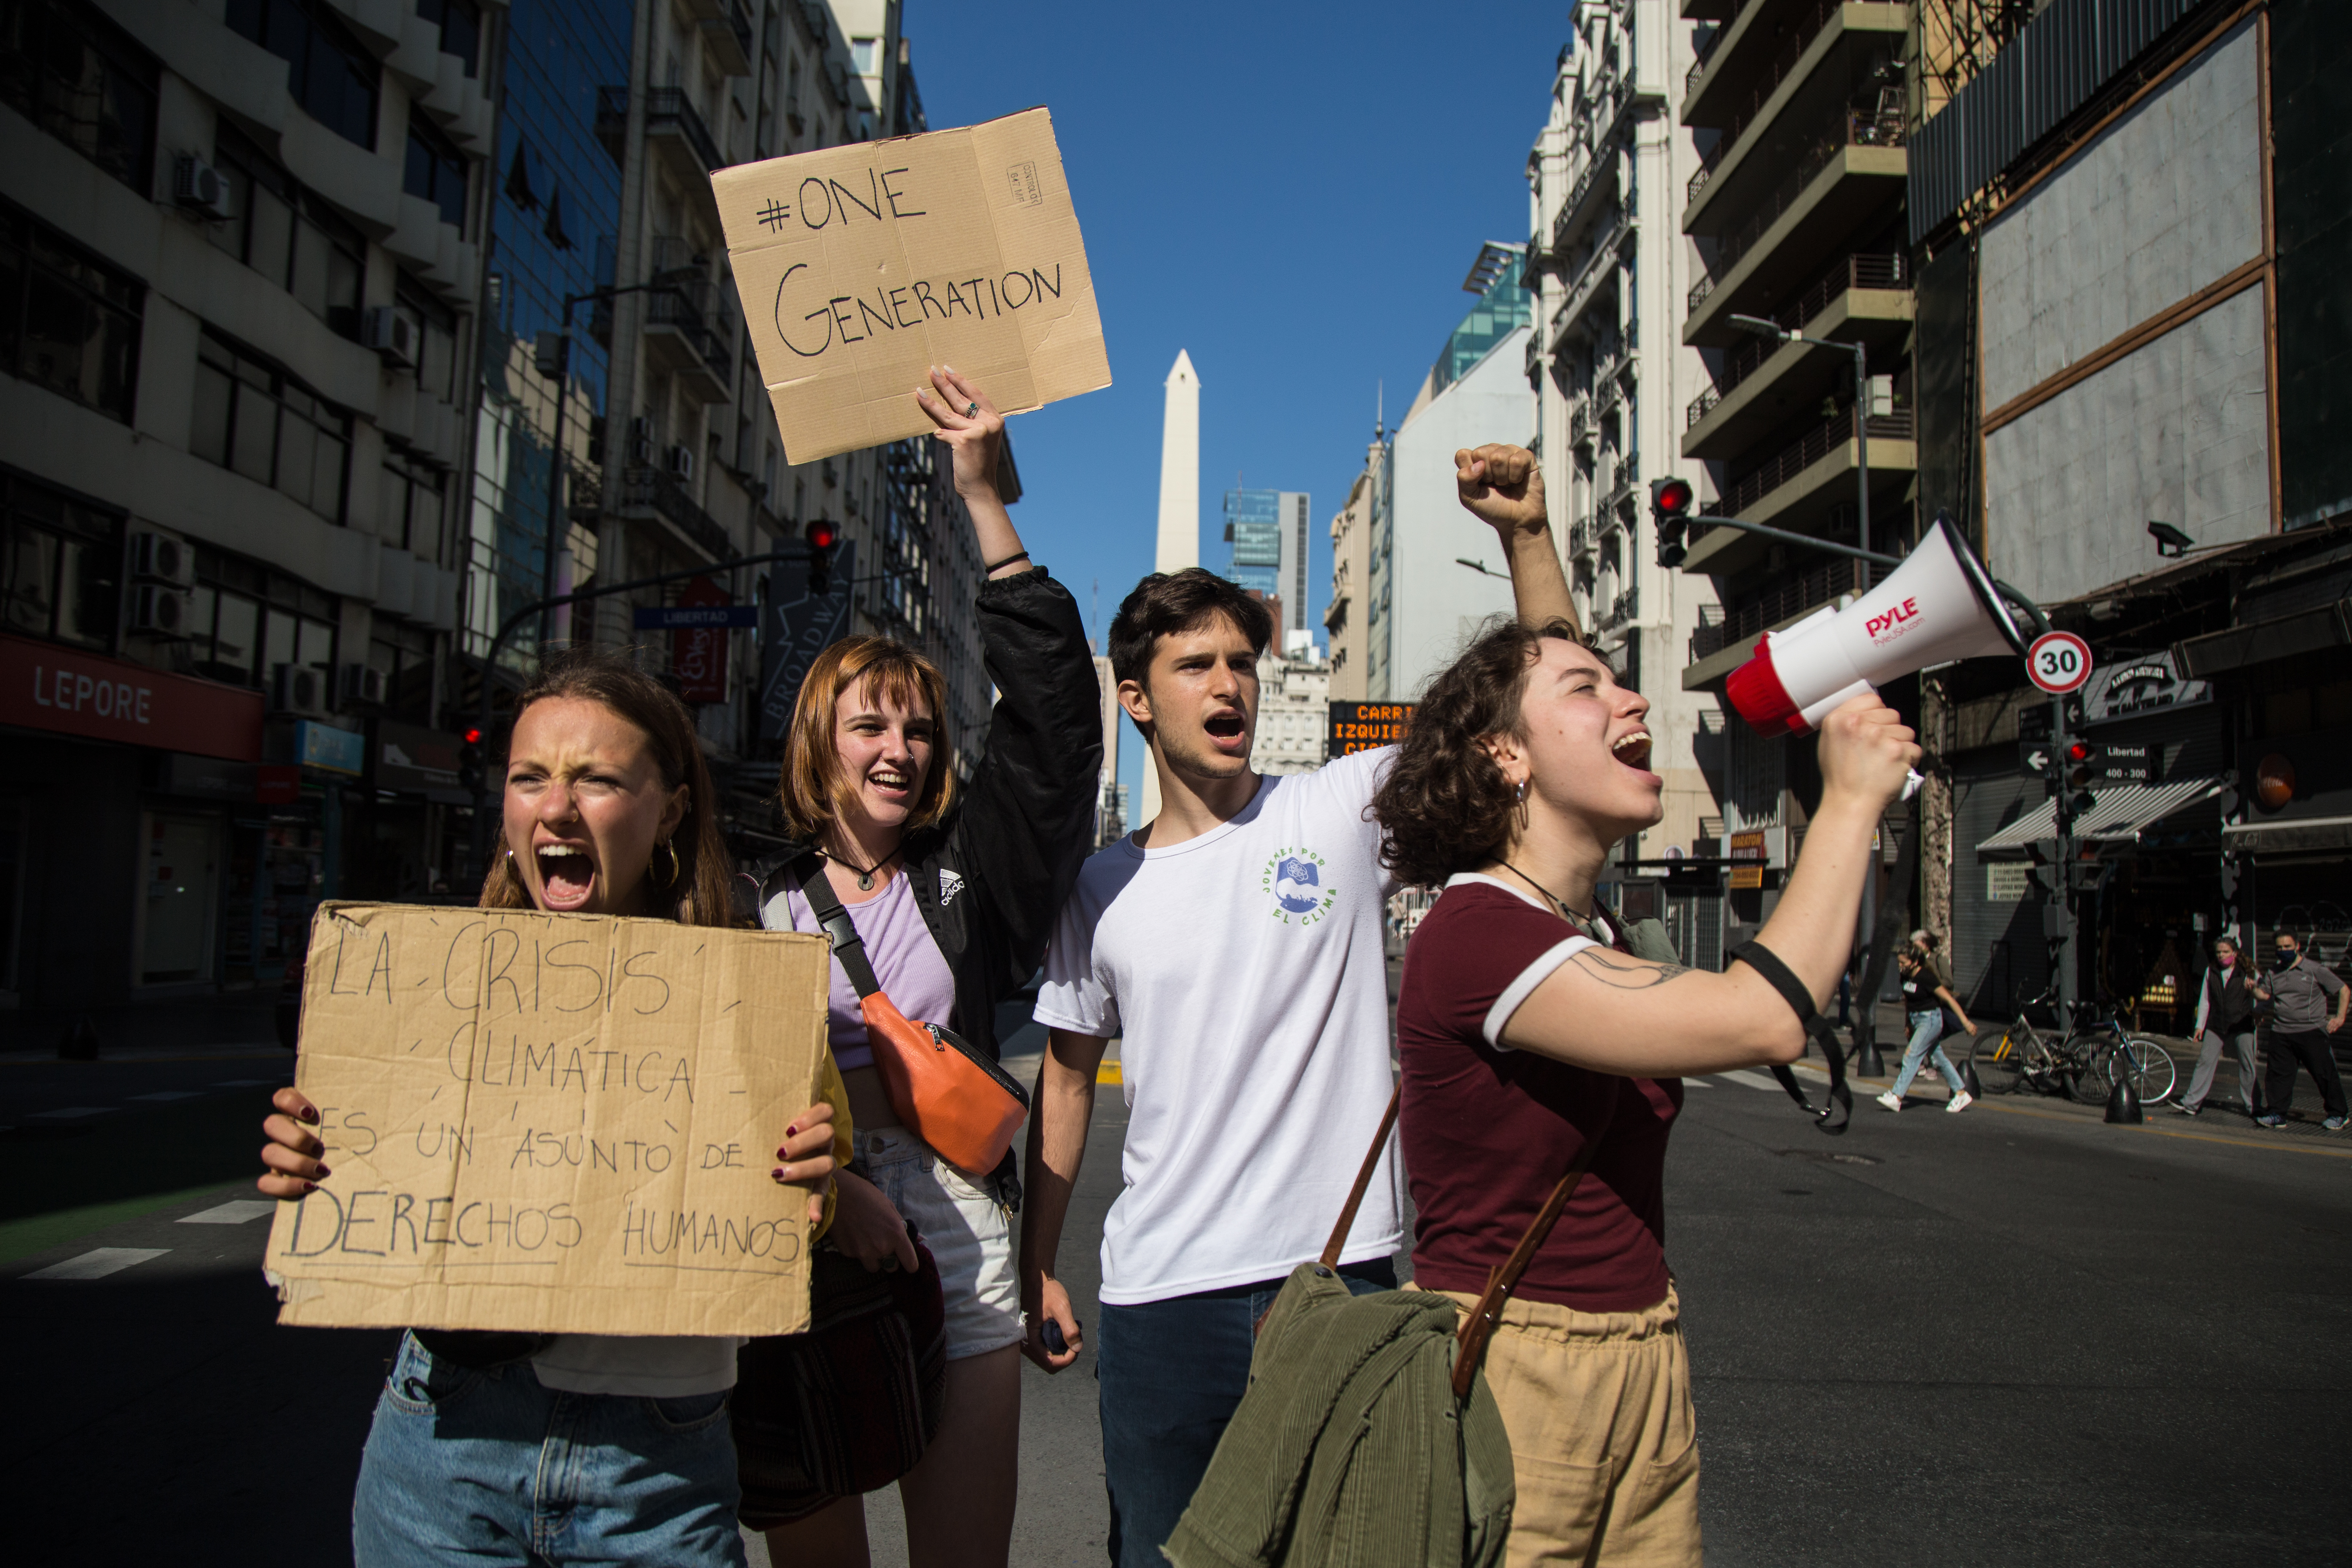 Young people holding cards and protesting in street